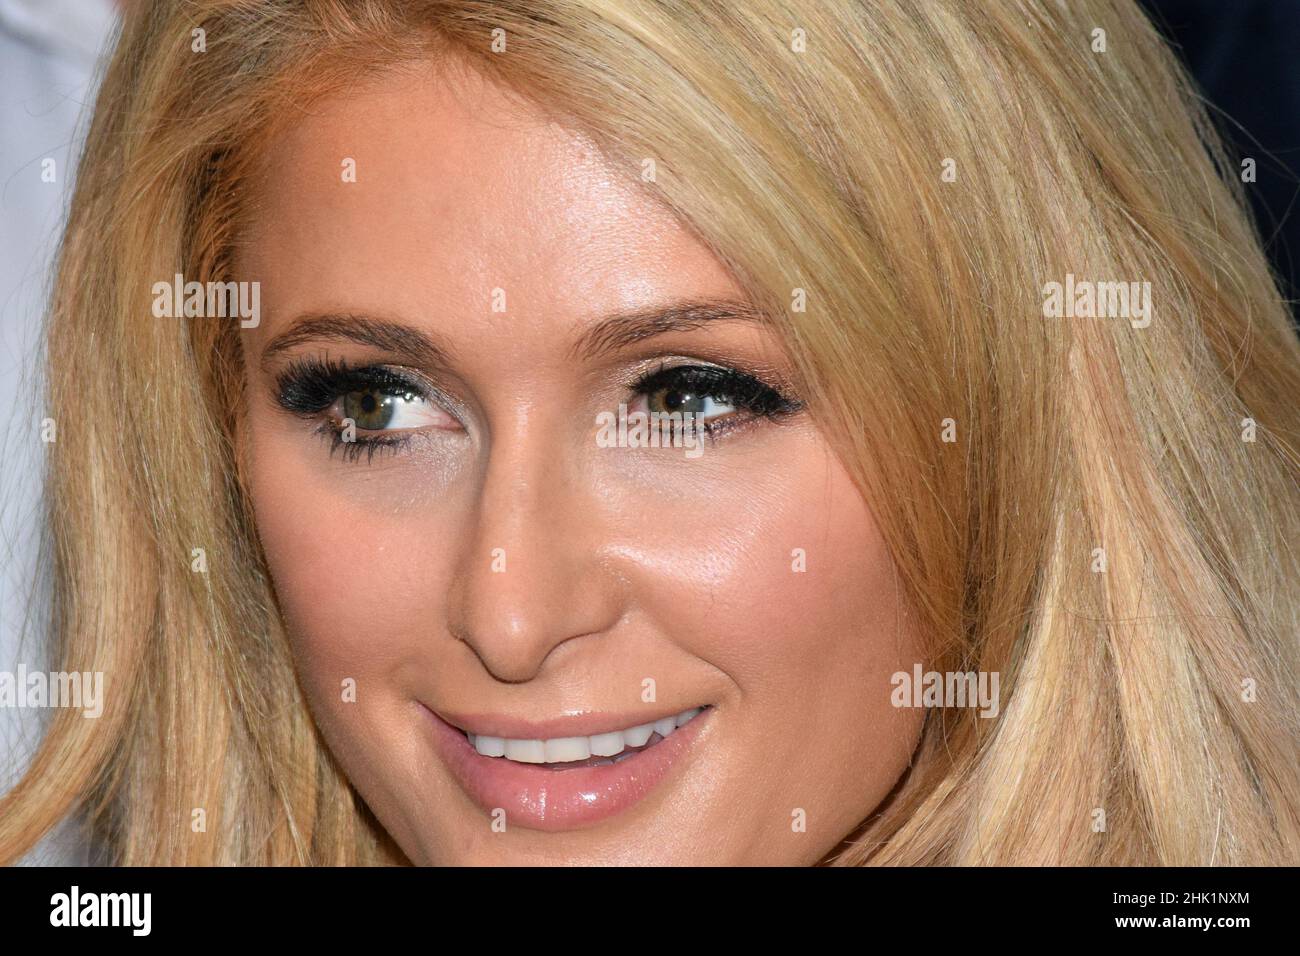 The American socialite Paris Hilton visits Mexico to present her new shoe  line, a new perfume, and a clothing line. In addition, she will visit some  associations that support children. Mexico City,